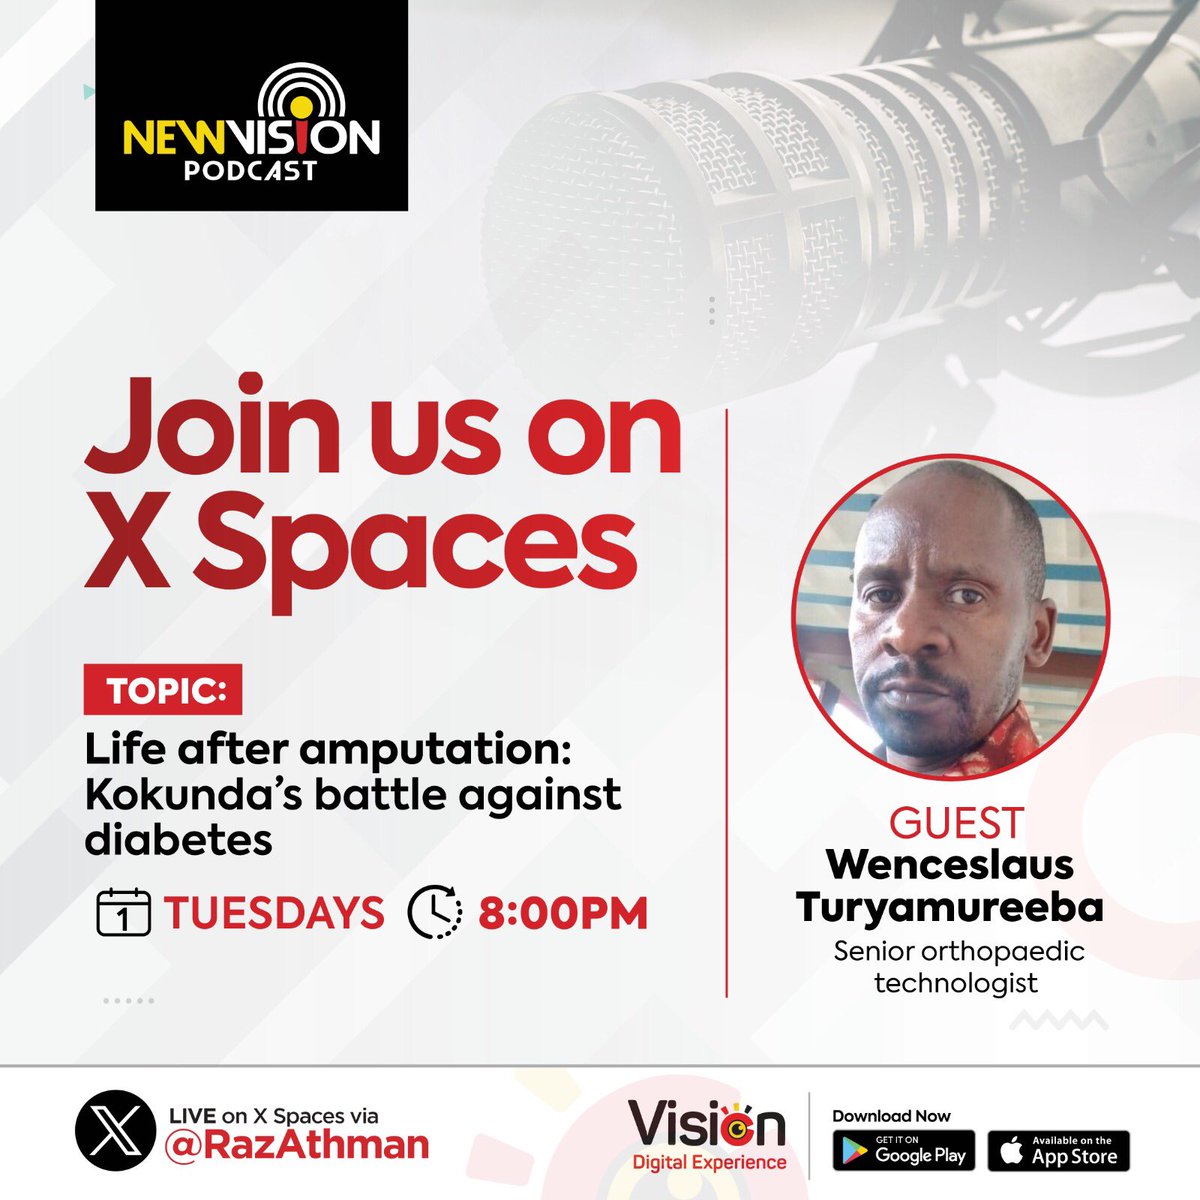 #VisionPodcast: Tonight our focus is on life after amputation: Kokunda’s battle against diabetes and tackling poor access to assistive technology devices in Uganda.

Click on this link to join the conversation now
x.com/razathman/stat…
#VisionUpdates 
@RazAthman